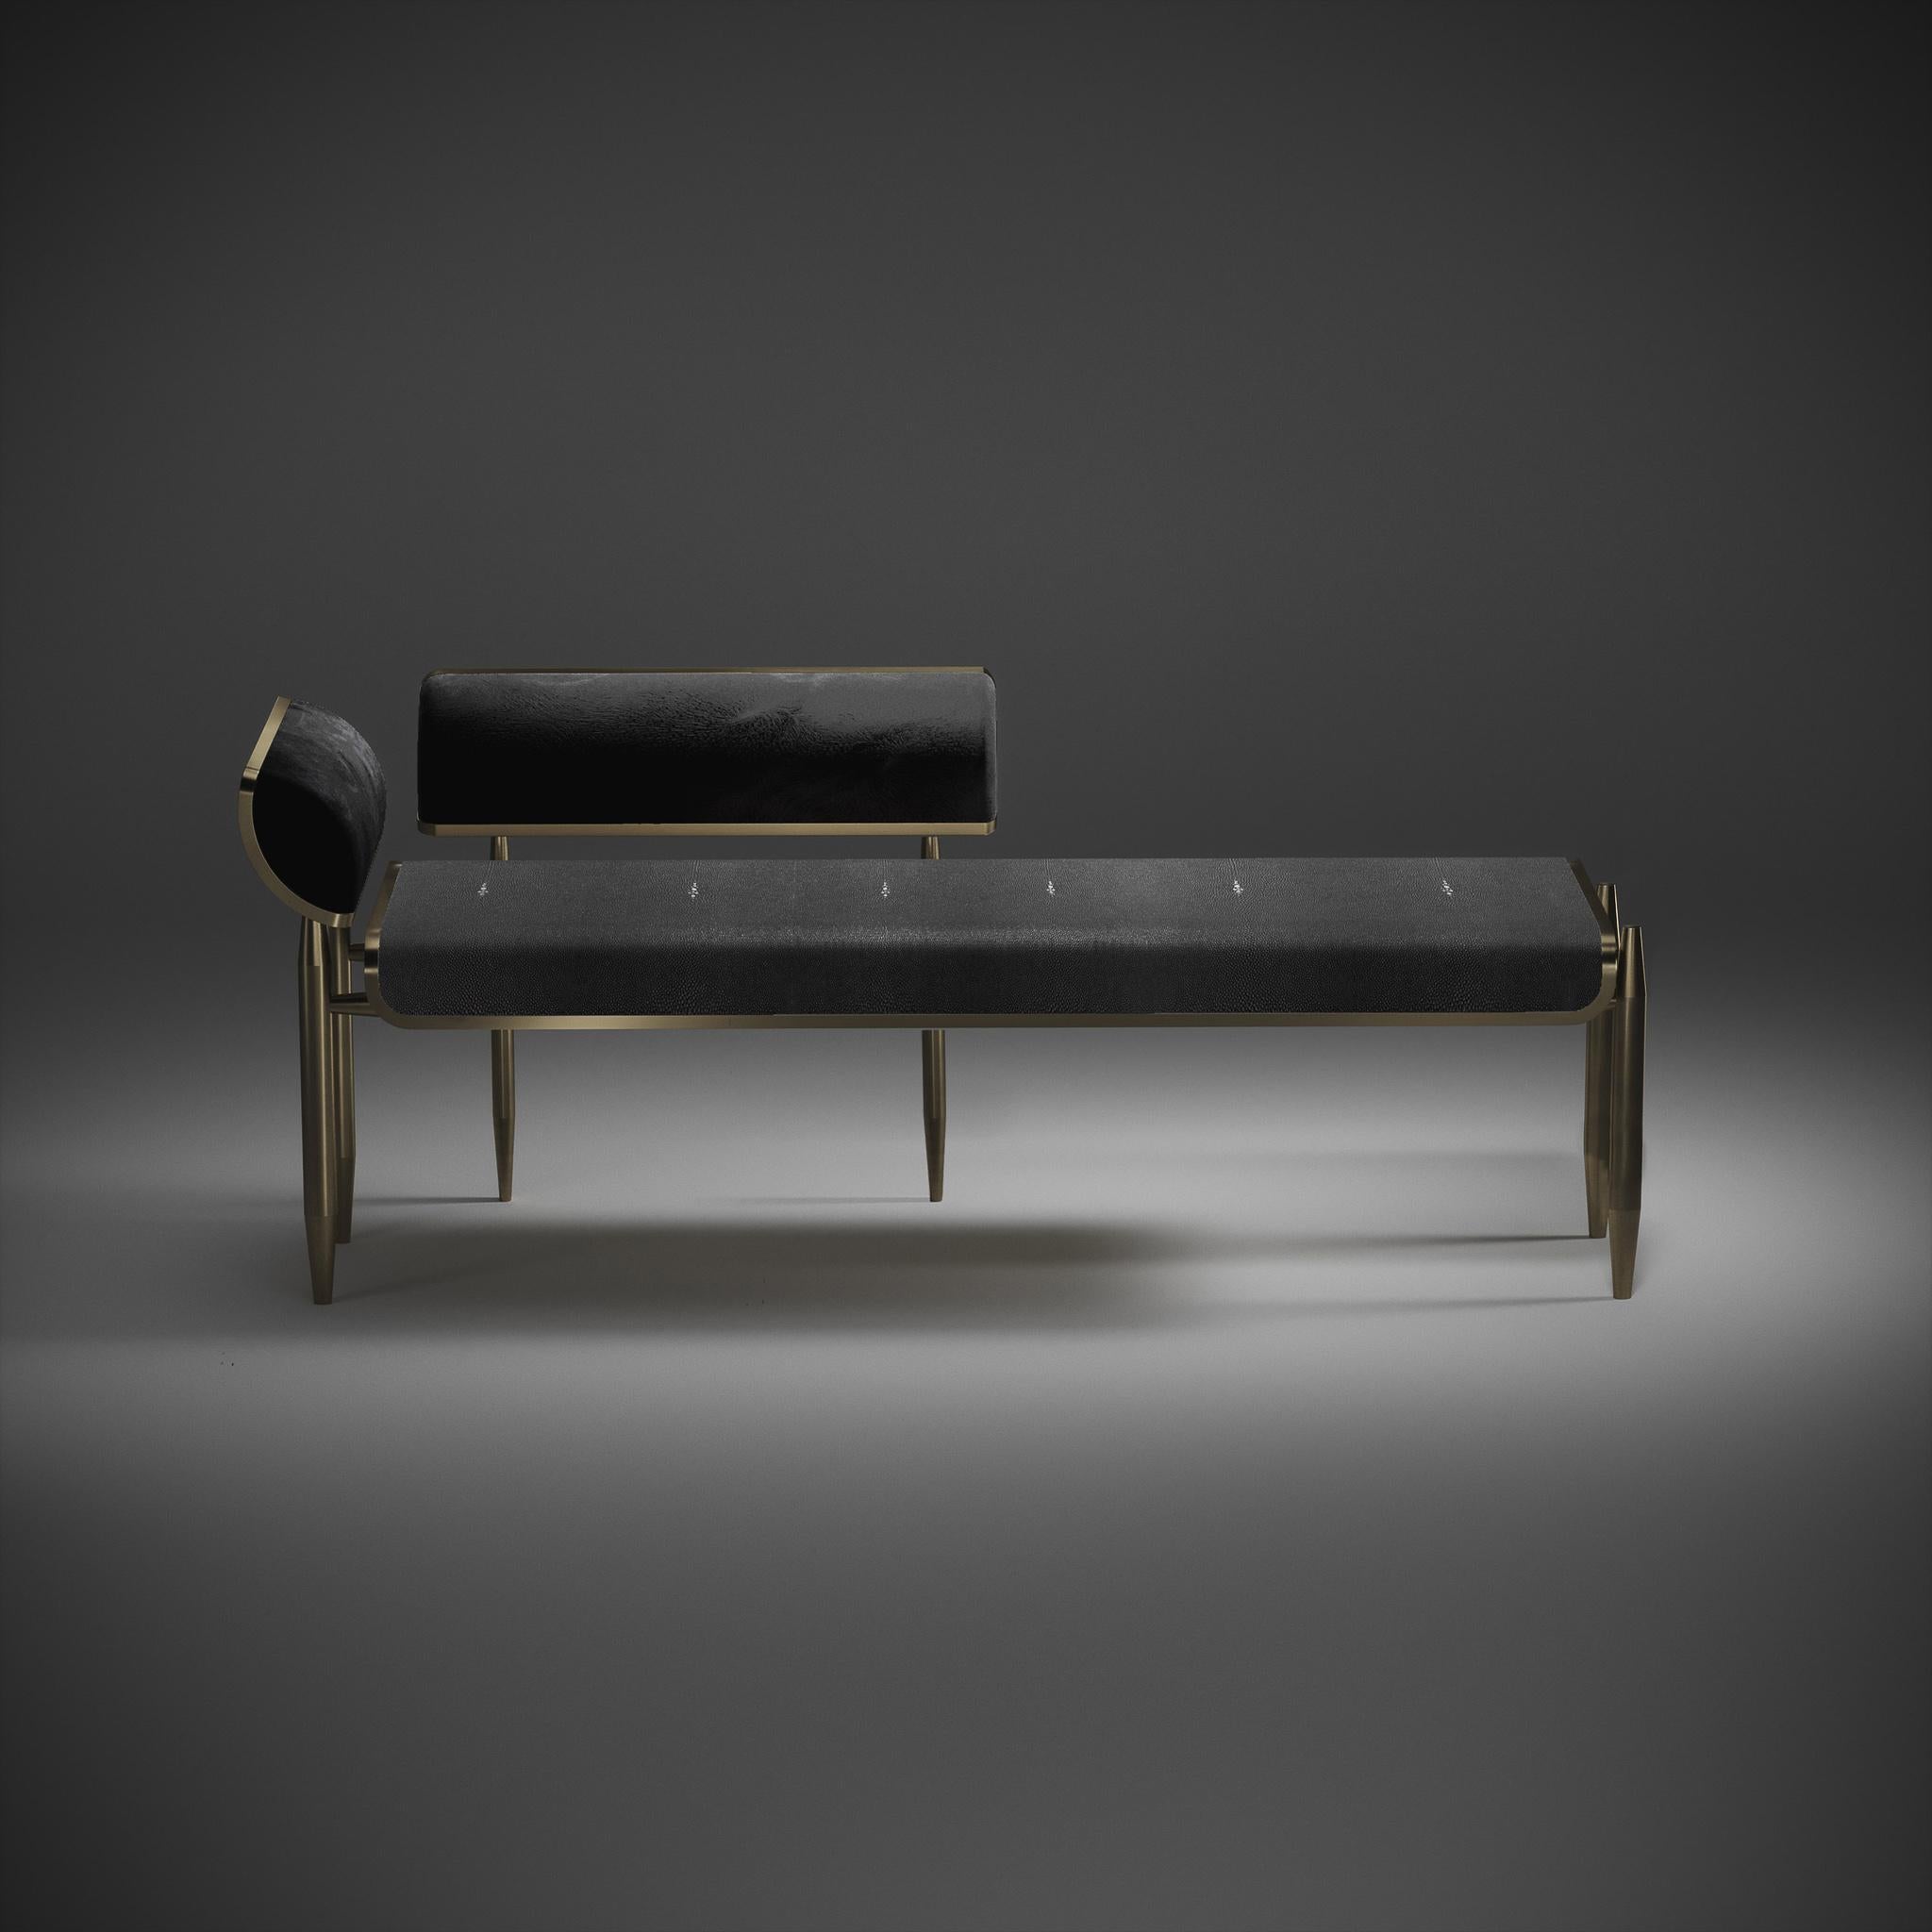 Inspired by the original Dandy bench by Kifu Paris (see images at end of slide), the Dandy II day bed is the ultimate luxury seating. The seating area is inlaid in coal black shagreen and the frame, legs and sides of the bench are completely inlaid